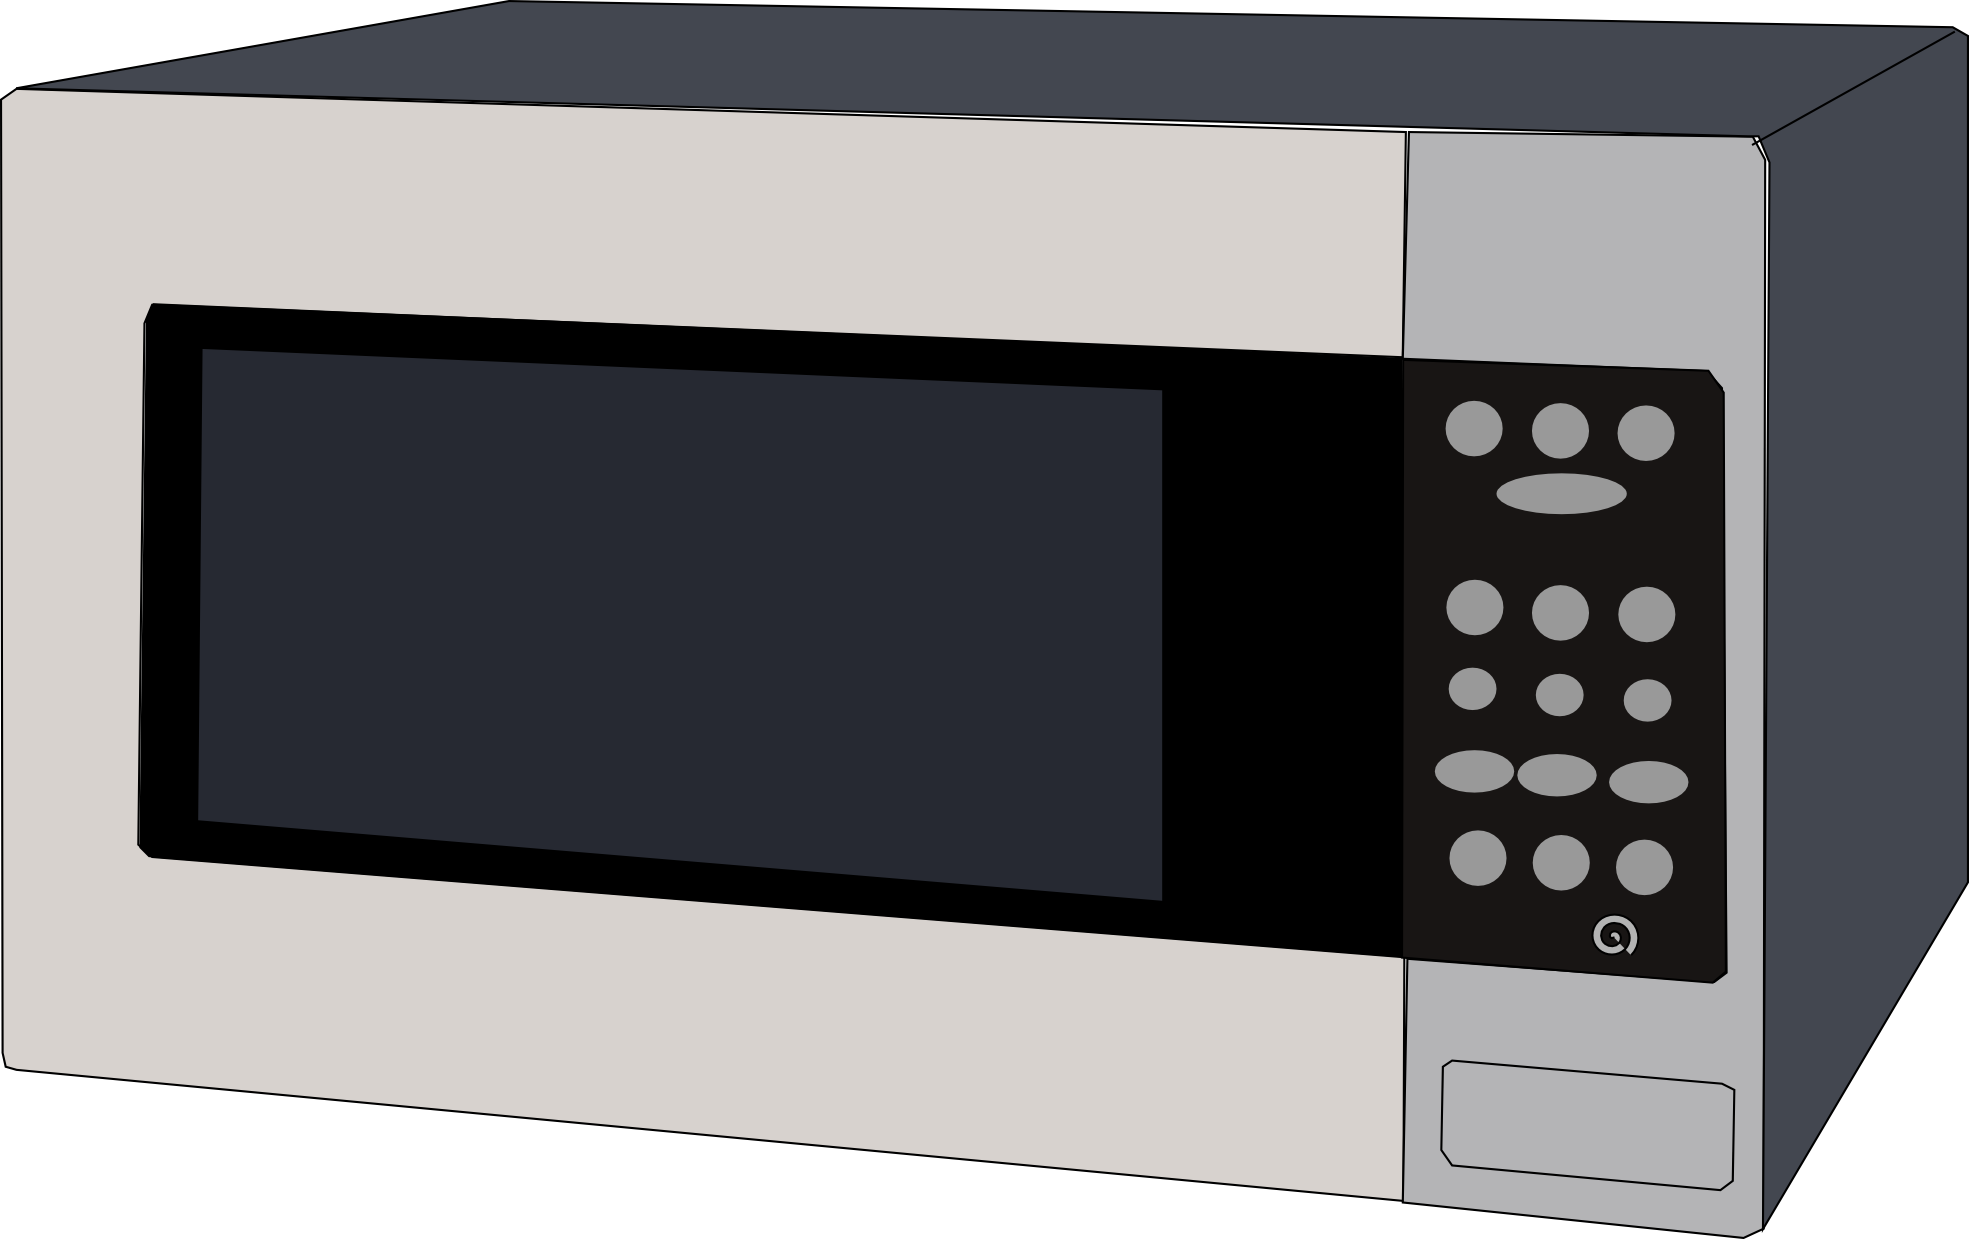 machovka microwave oven | Clipart Panda - Free Clipart Images